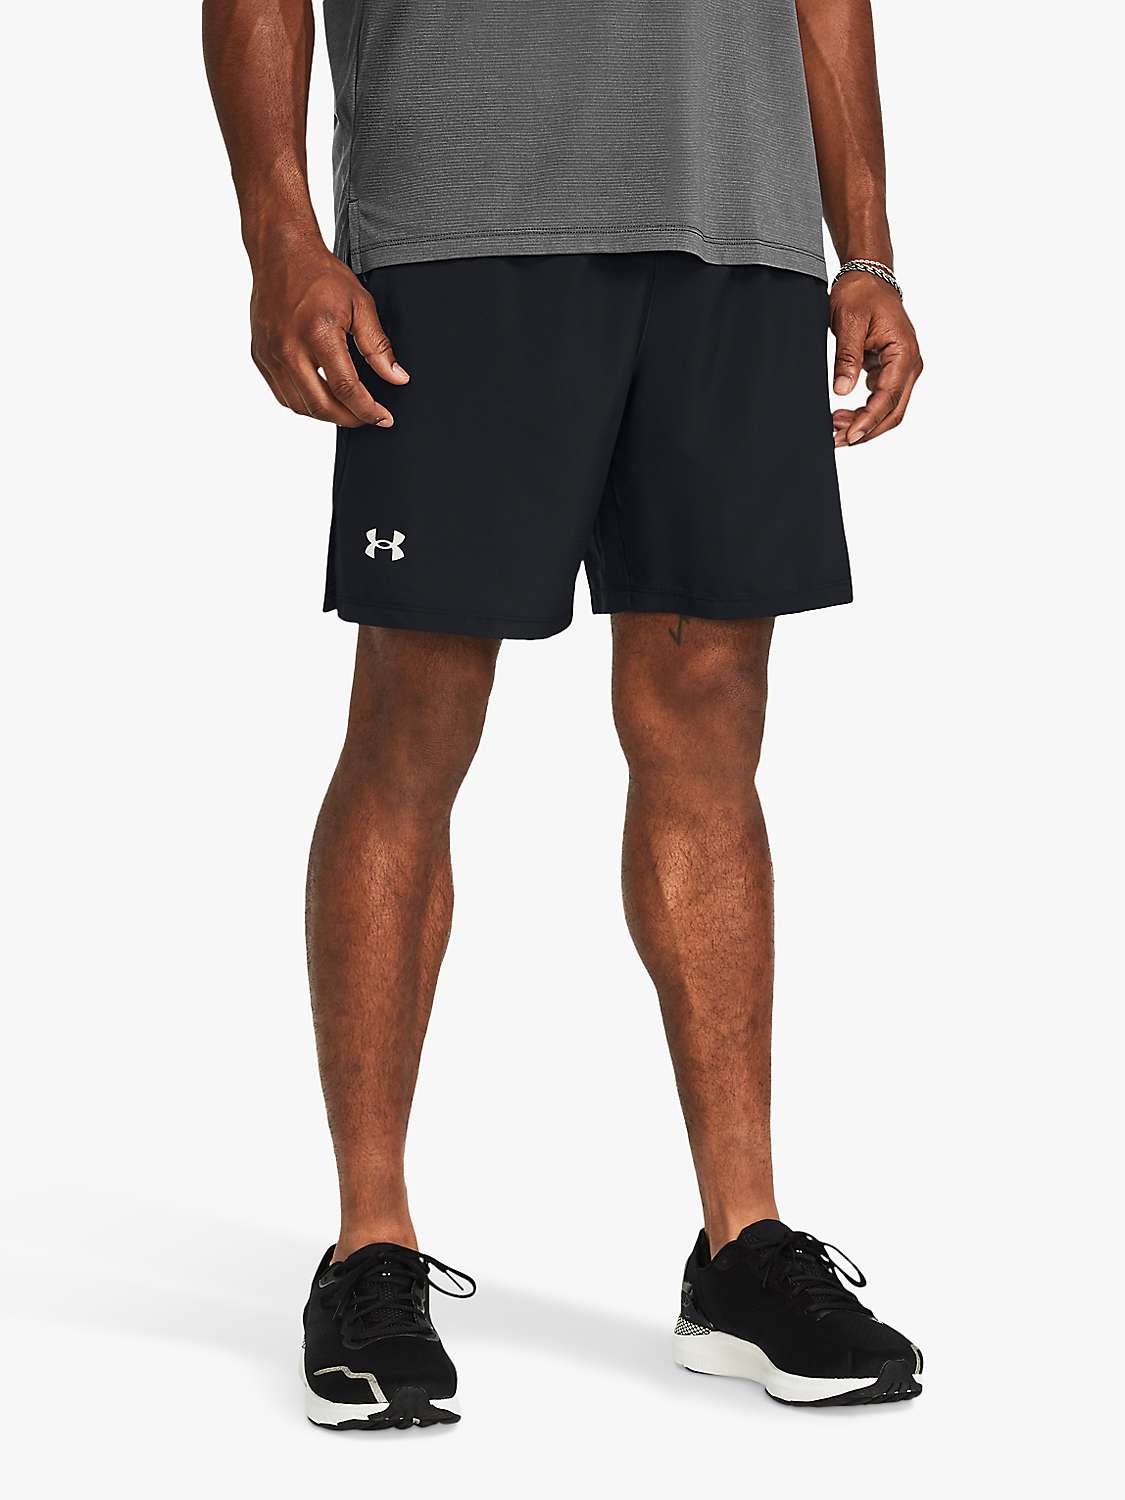 Buy Under Armour Launch Long Running Shorts, Black/Reflective Online at johnlewis.com